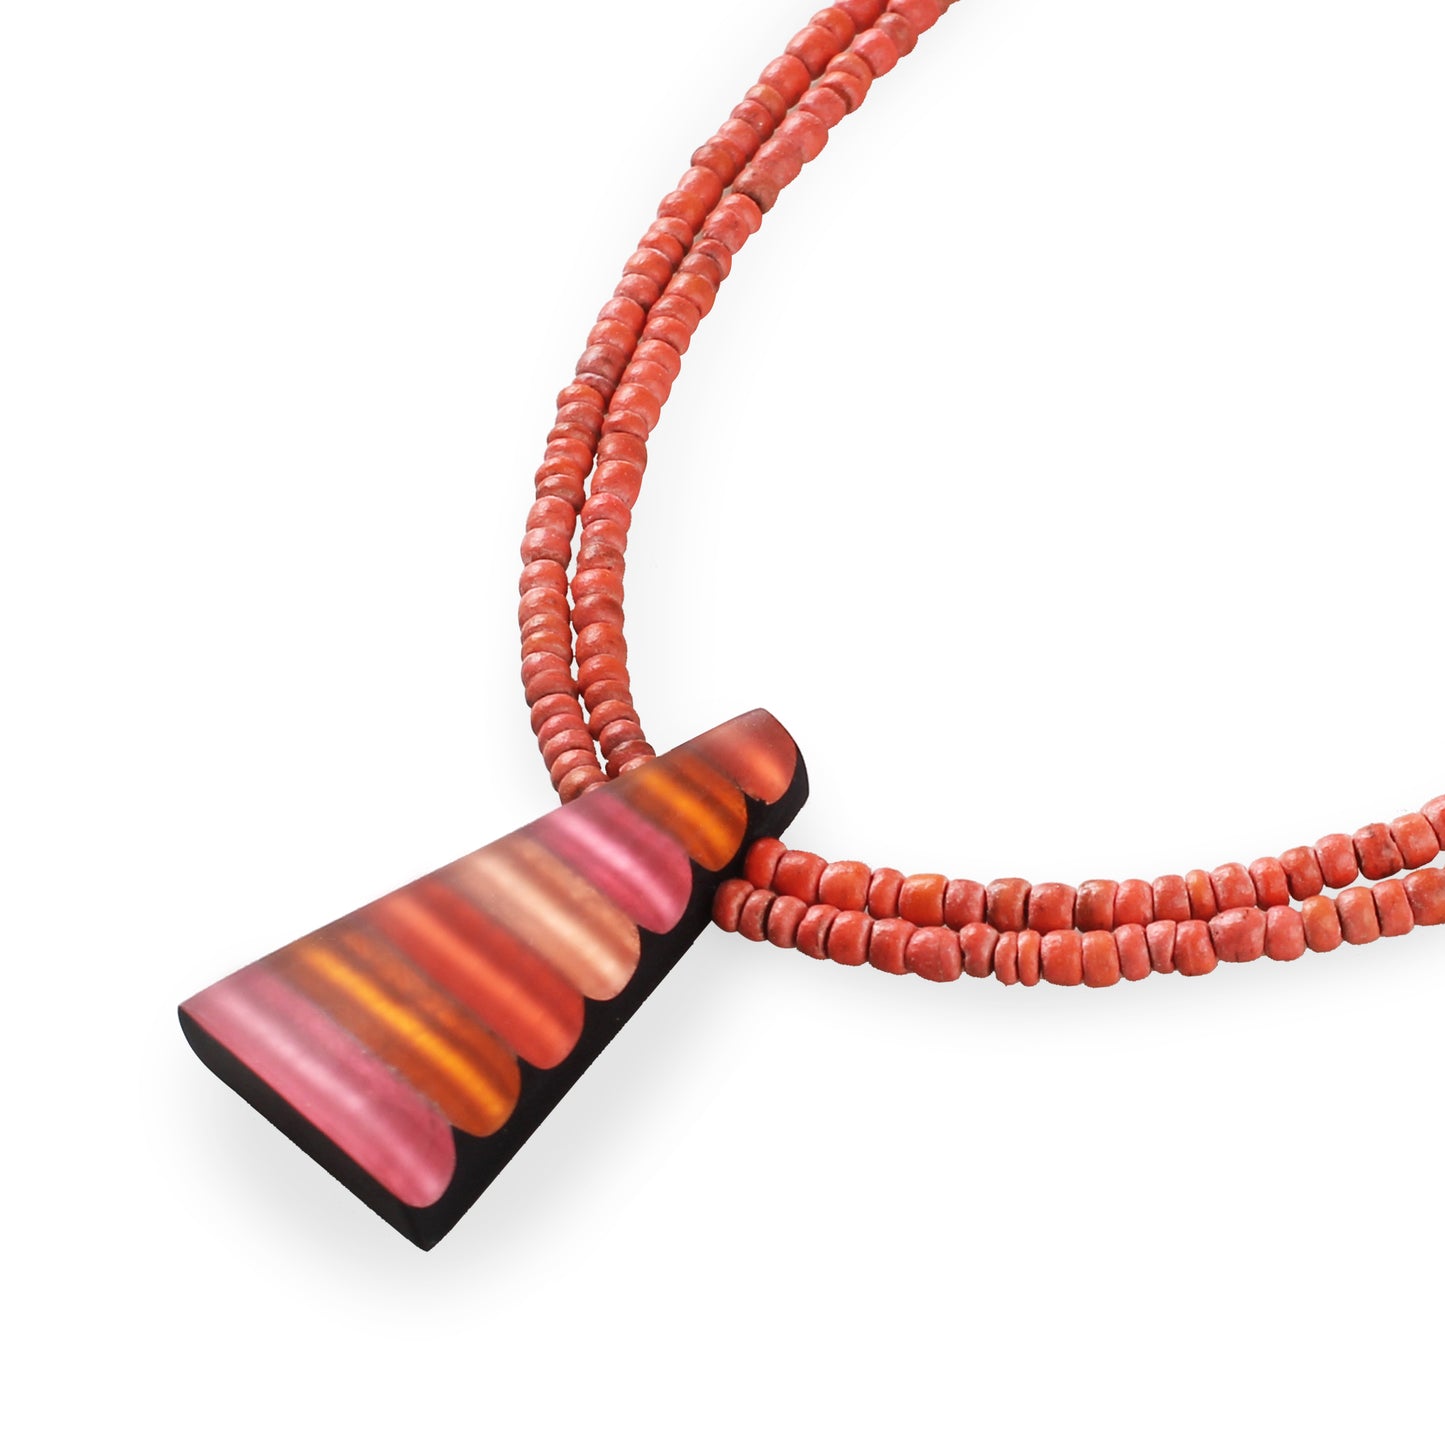 Coral Triangle Stripes Matte Pendant on Coco Beads